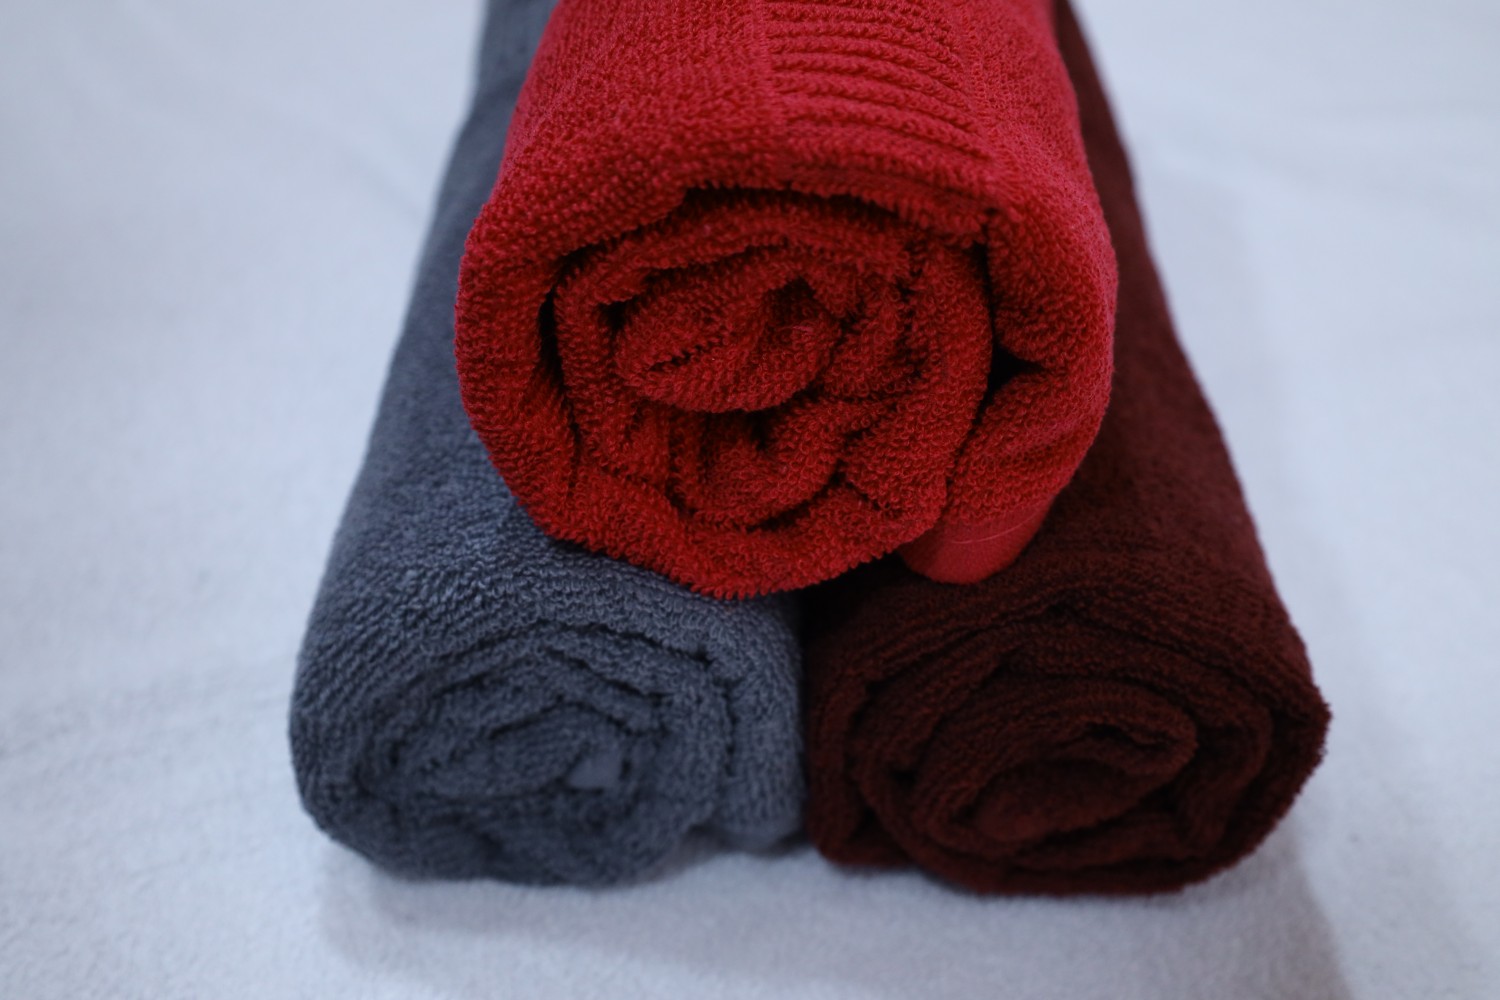 Taurusent Super Soft 100% Cotton High Absorbing Turkey Bath Towel, Size:  30x60 inches (450 GSM) - Pack of 3 (Red-Maroon-Grey)